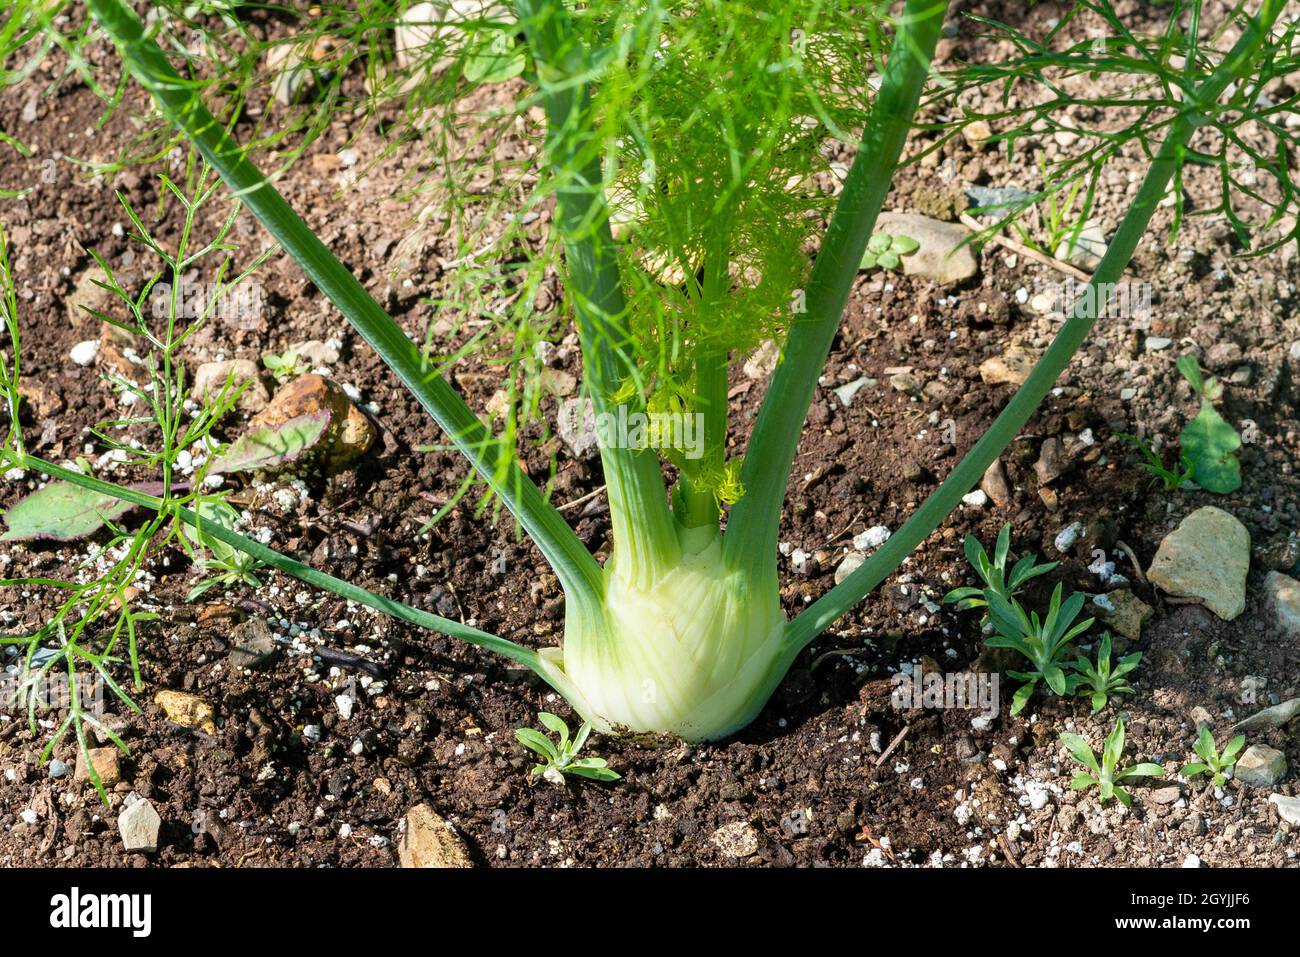 A closeup of an organic kohlrabi vegetable with a turnip like root vegetable and long green leafy stalks growing out of the plant. Stock Photo